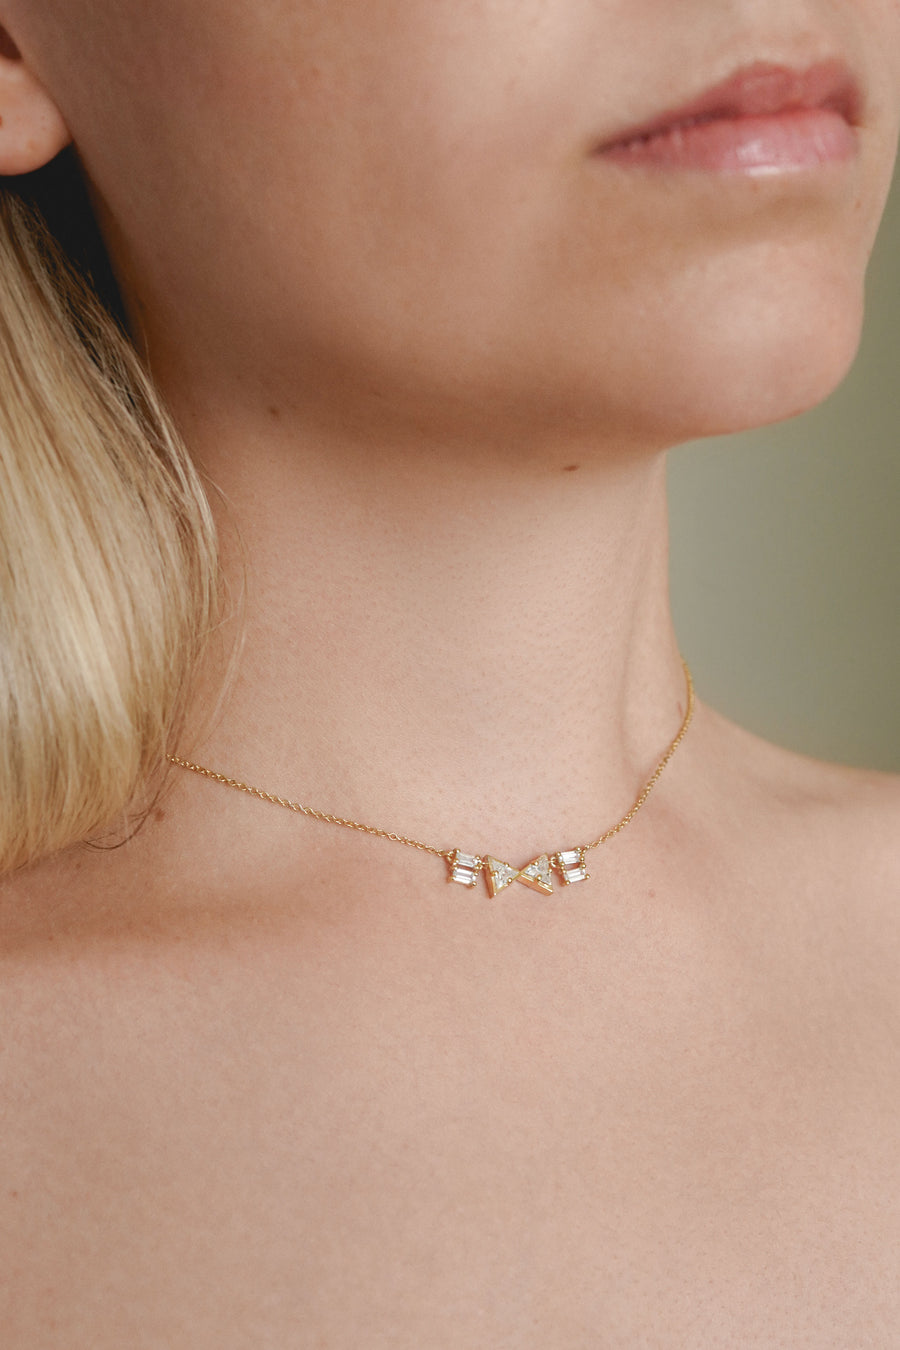 contemporary fine Diamond Necklace Atlante collection - Recycled gold Made in Antwerp by Nayestones